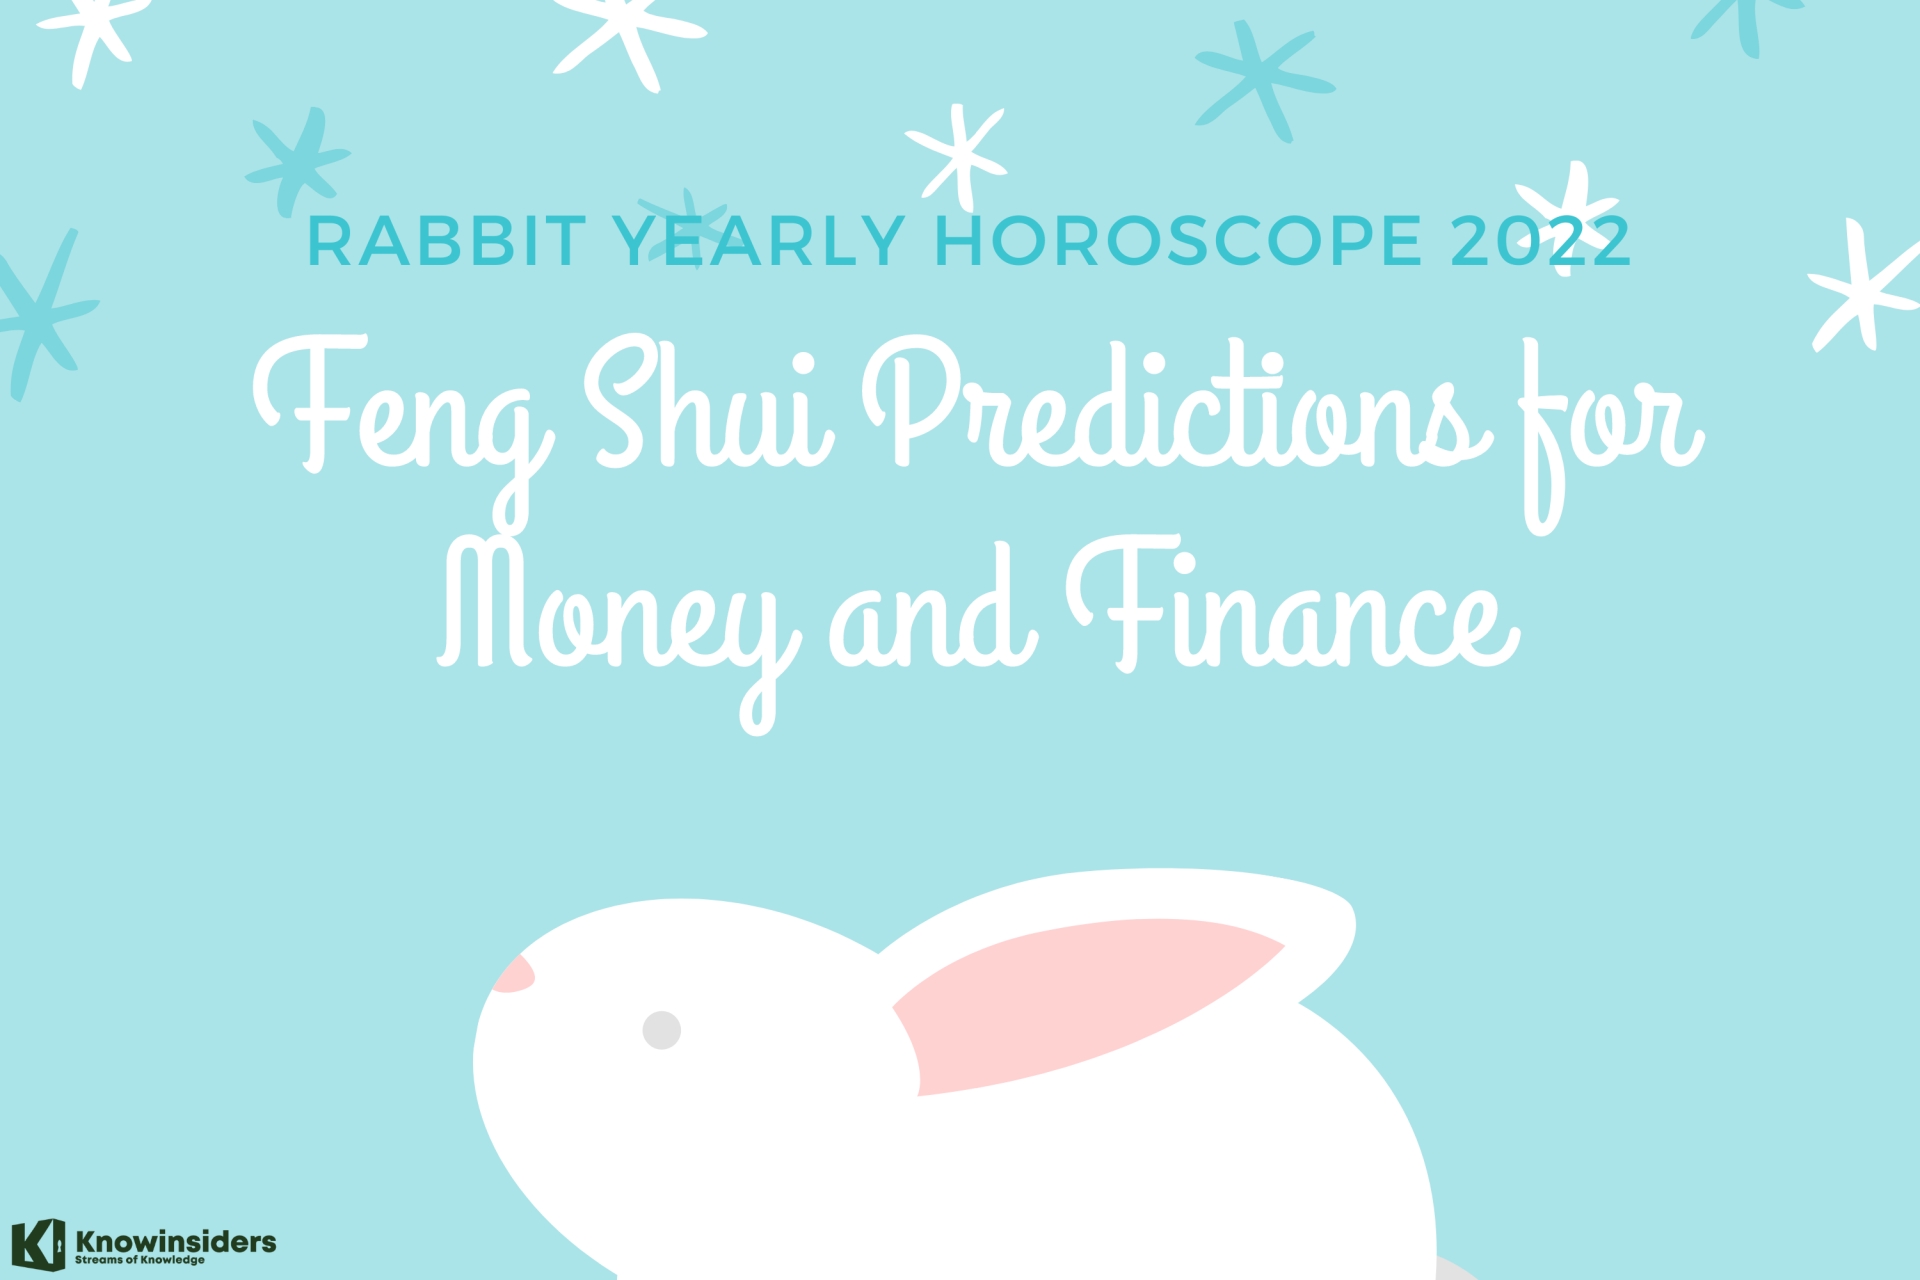 rabbit yearly horoscope 2022 feng shui prediction for money and finance